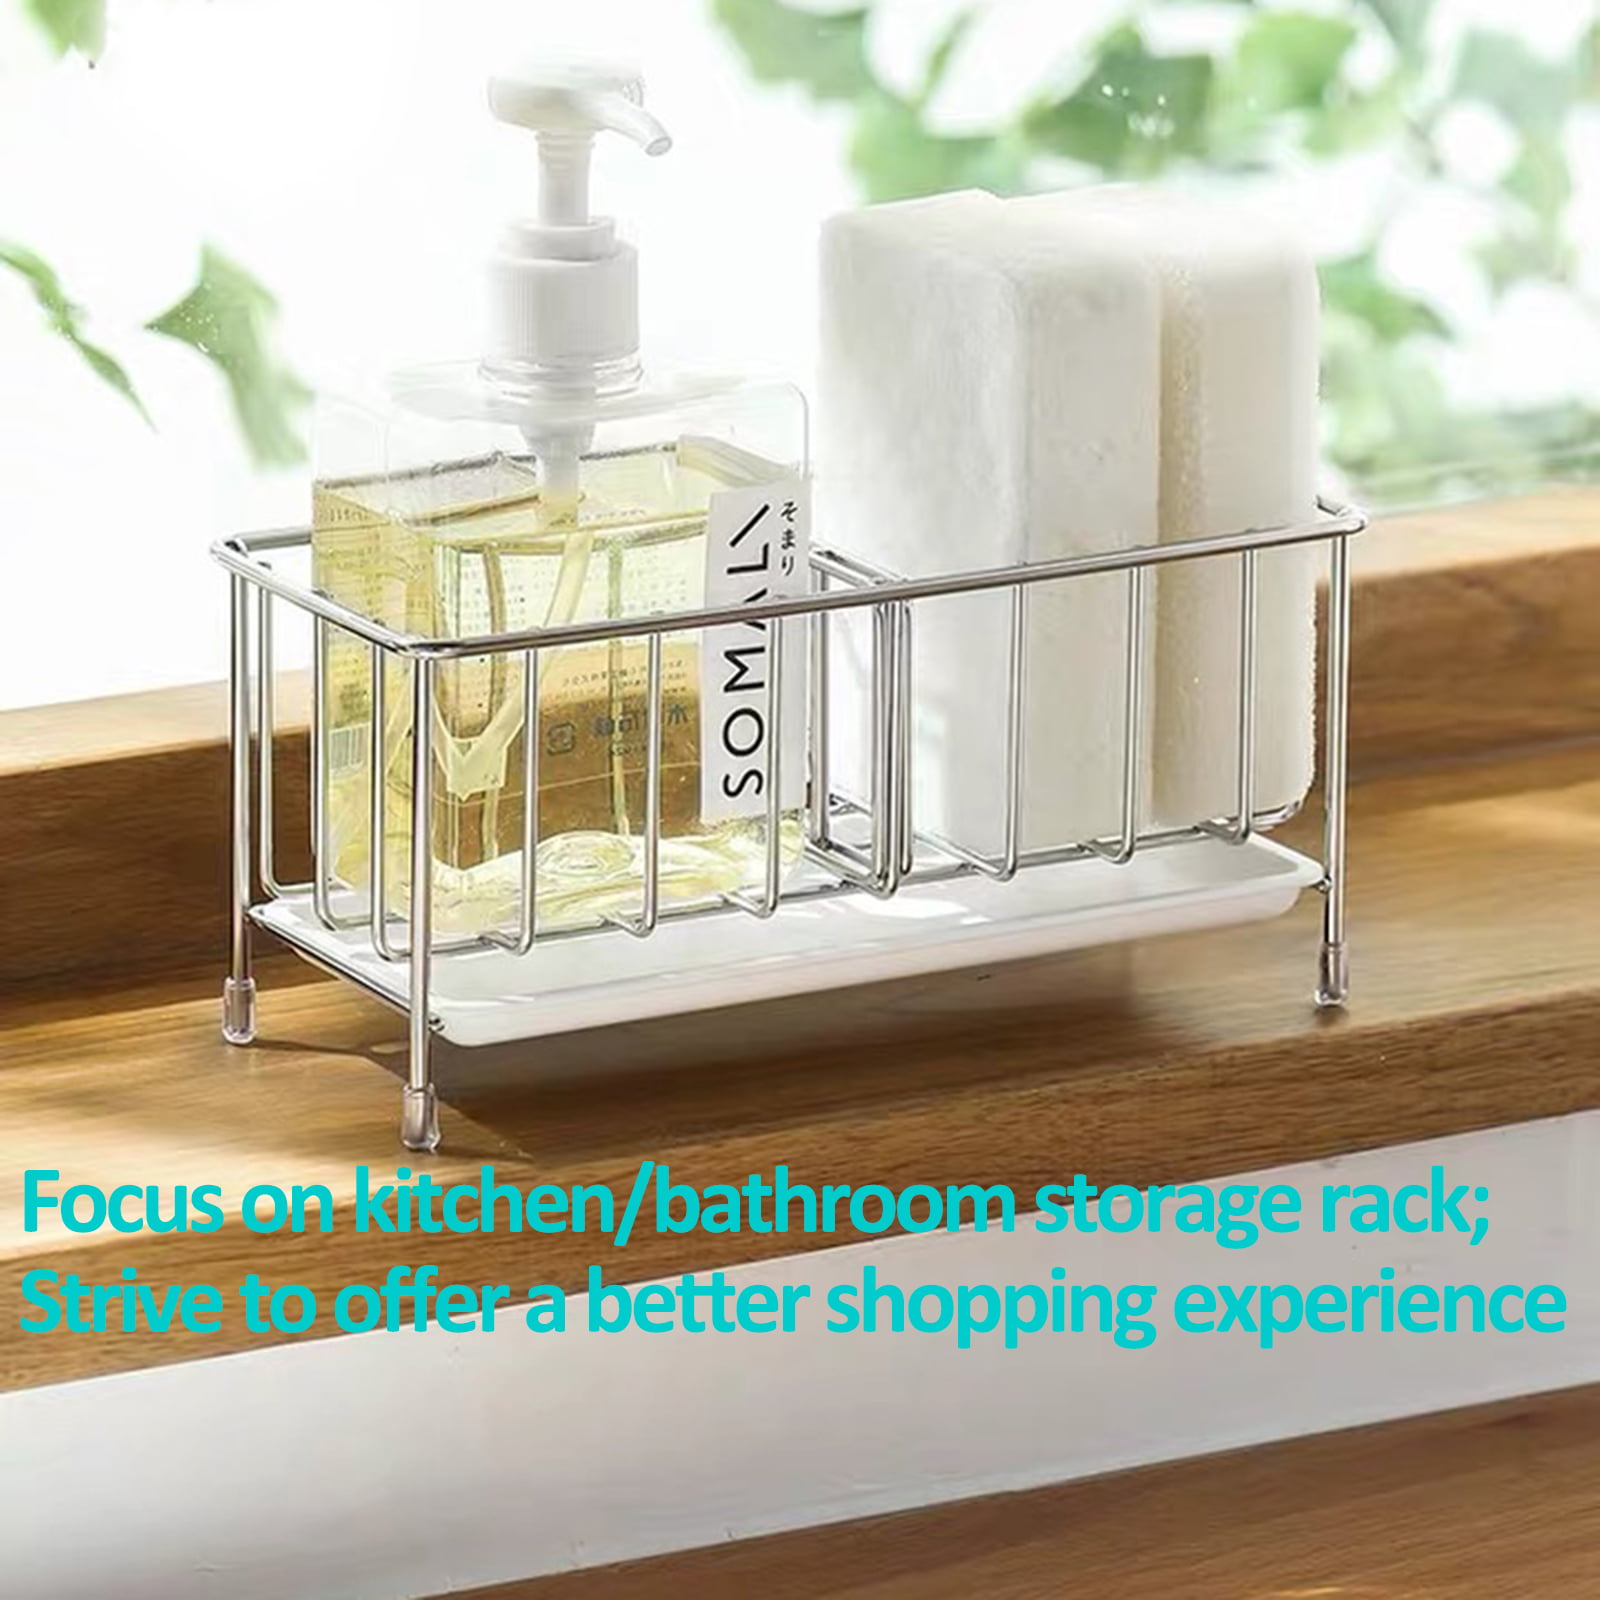 Oriware Sink Caddy Organizer with Built-in Soap Dispenser, Sponge Holder  for Kitchen Sink with Hand Soap Dispenser (Stainless Steel Pump and Spout)